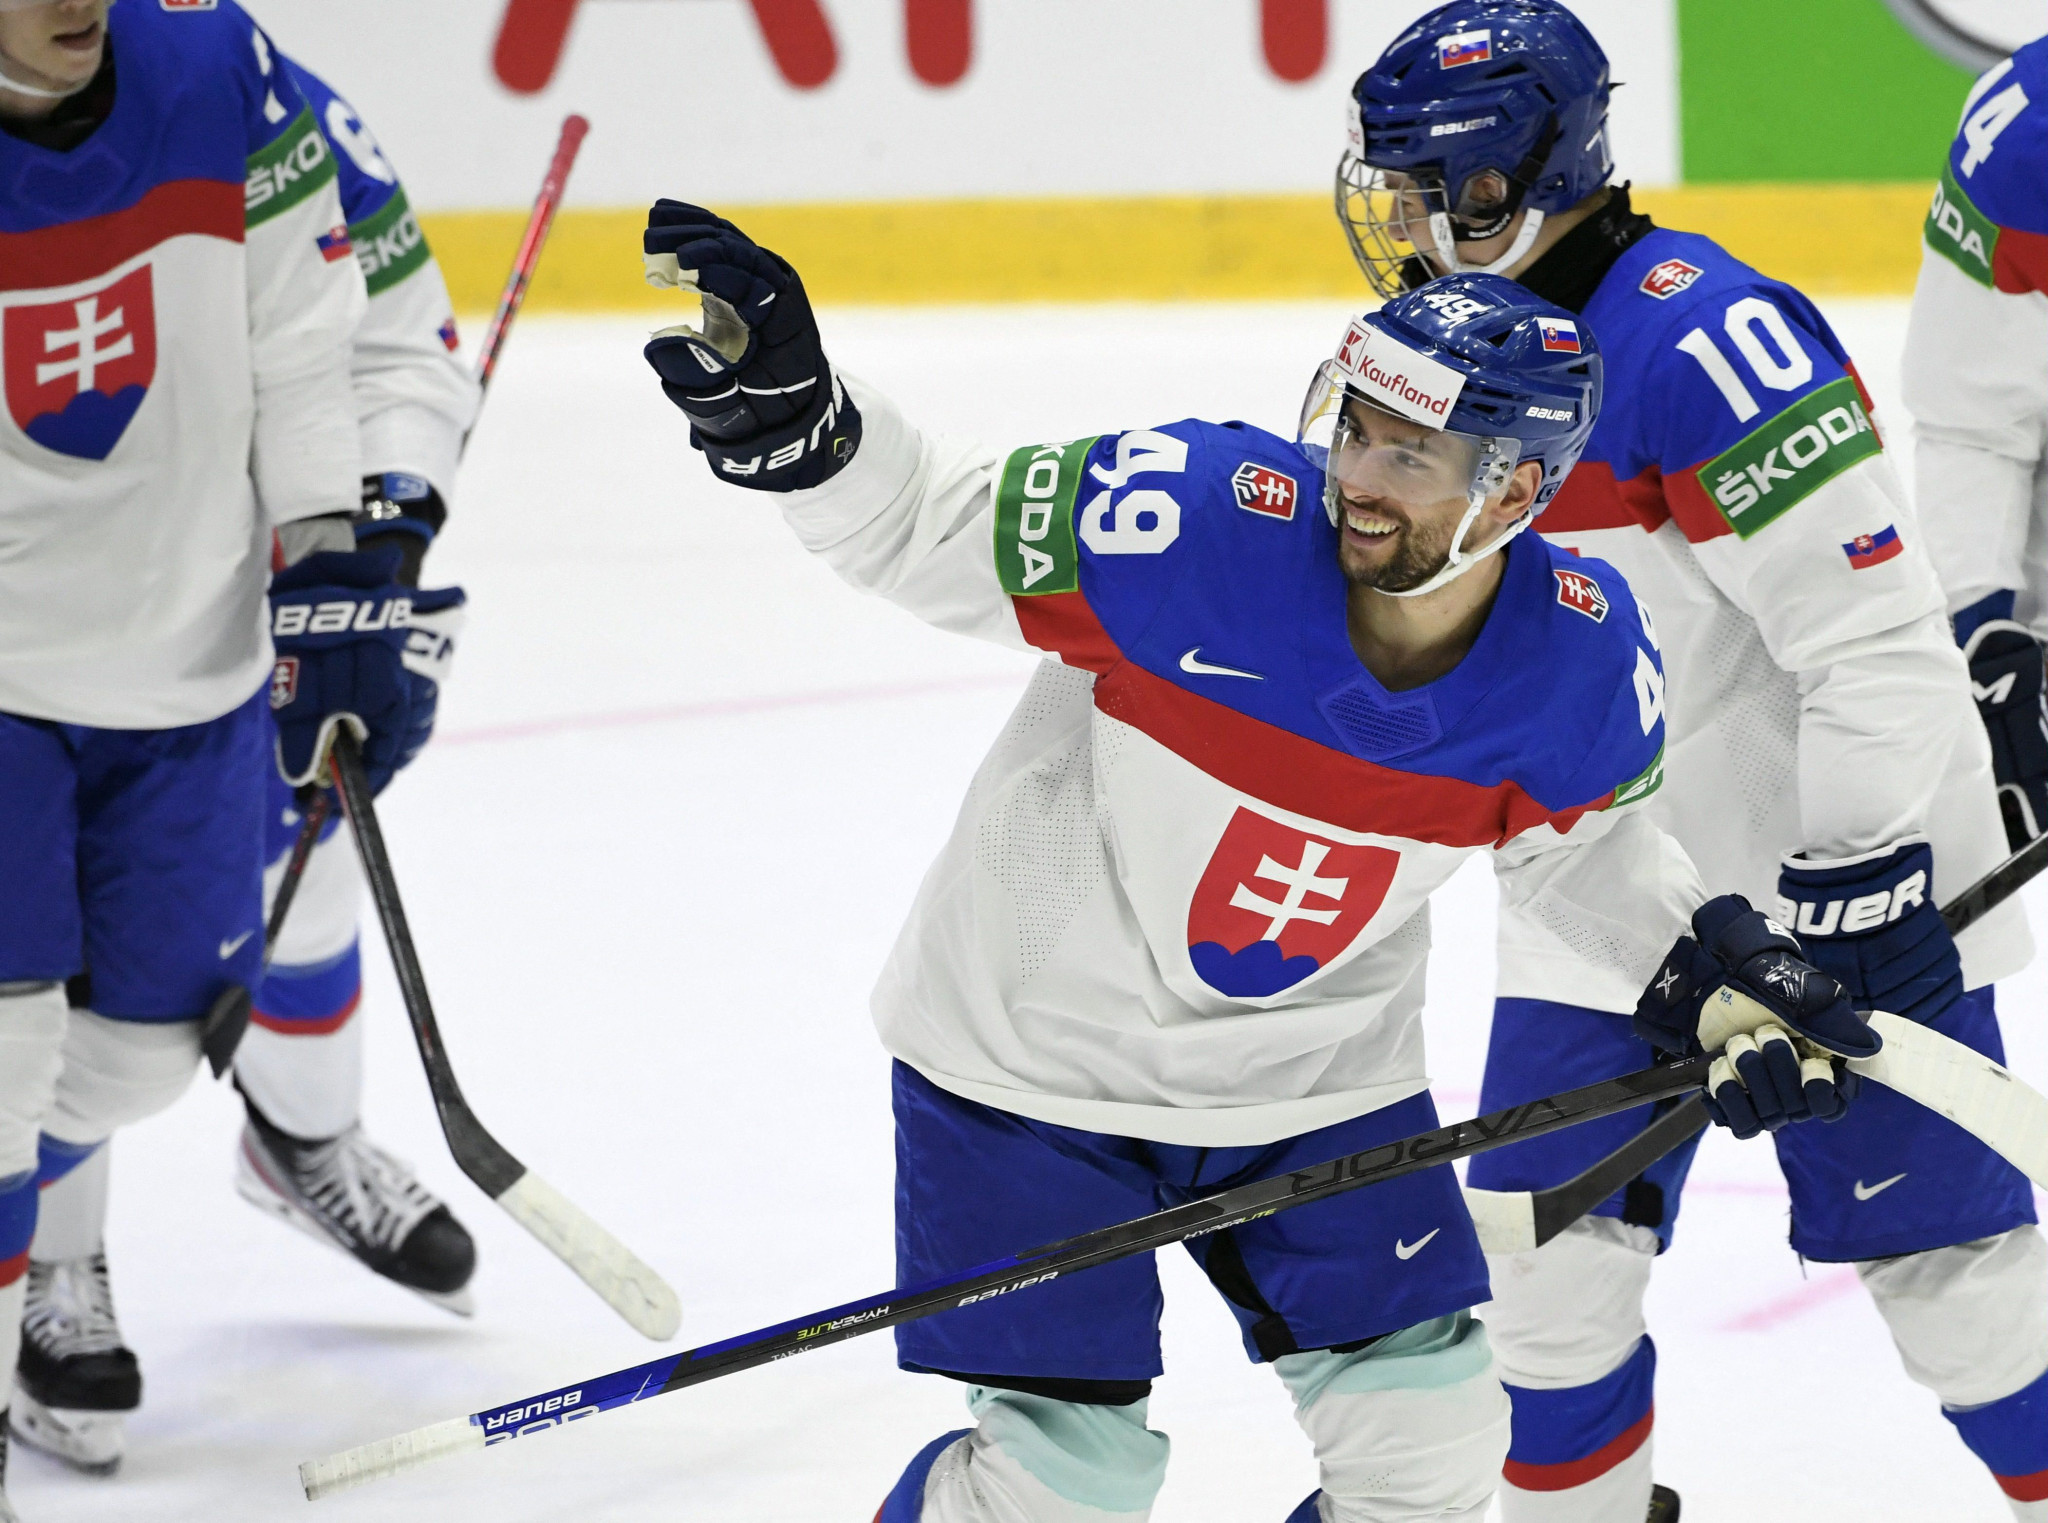 Slovakia played out a thriller against Kazakhstan at the IIHF World Championship ©Getty Images 